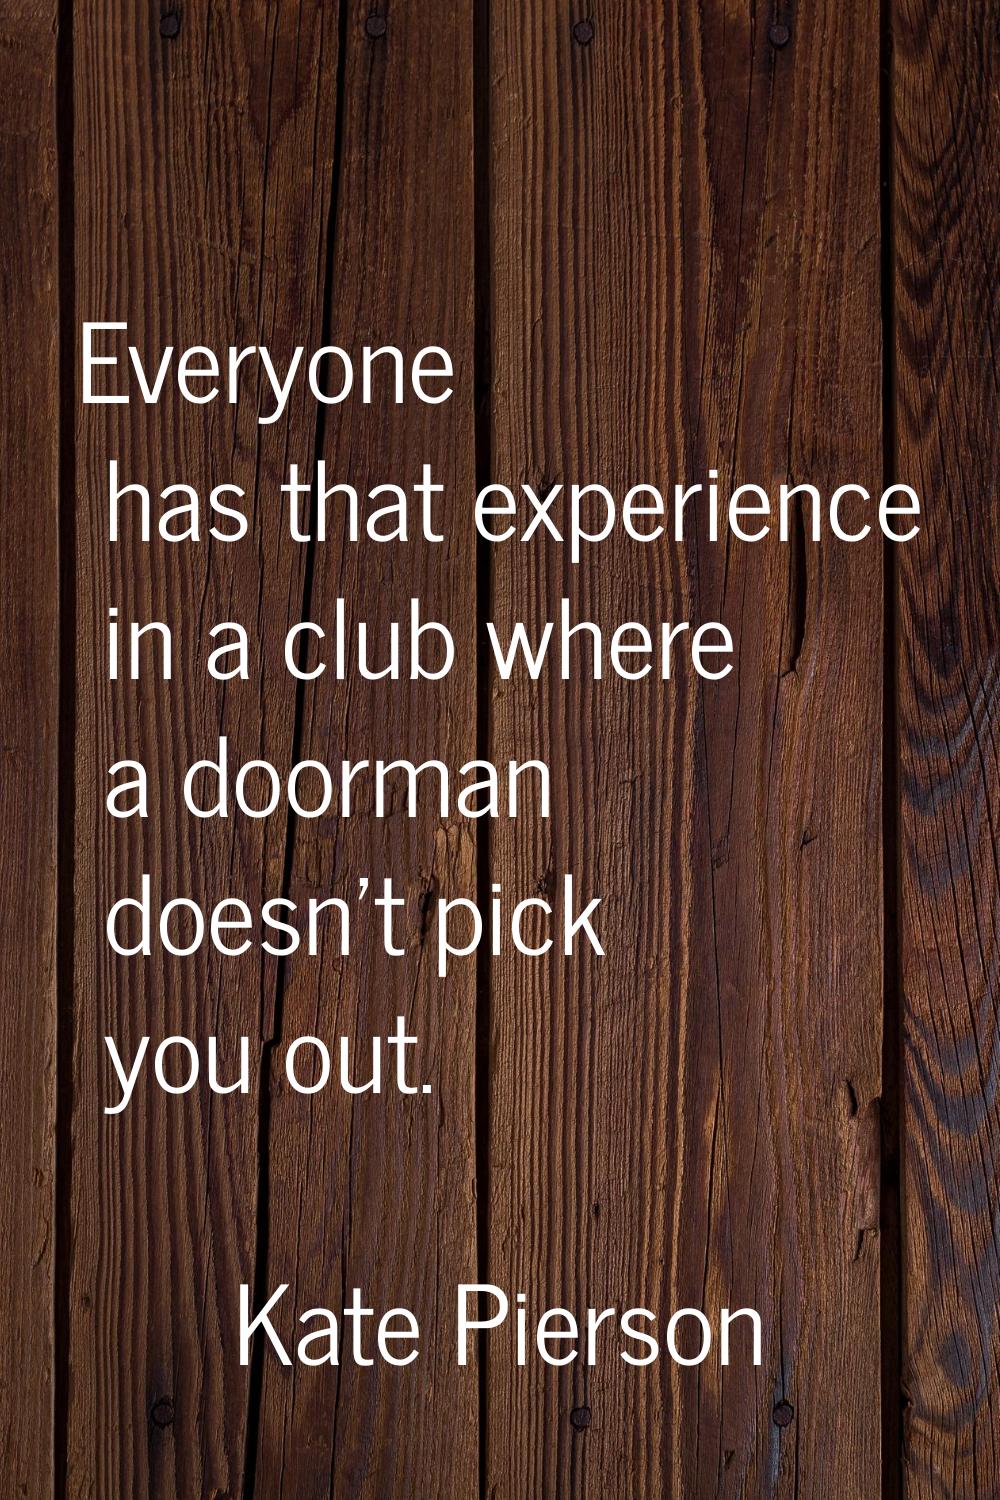 Everyone has that experience in a club where a doorman doesn't pick you out.